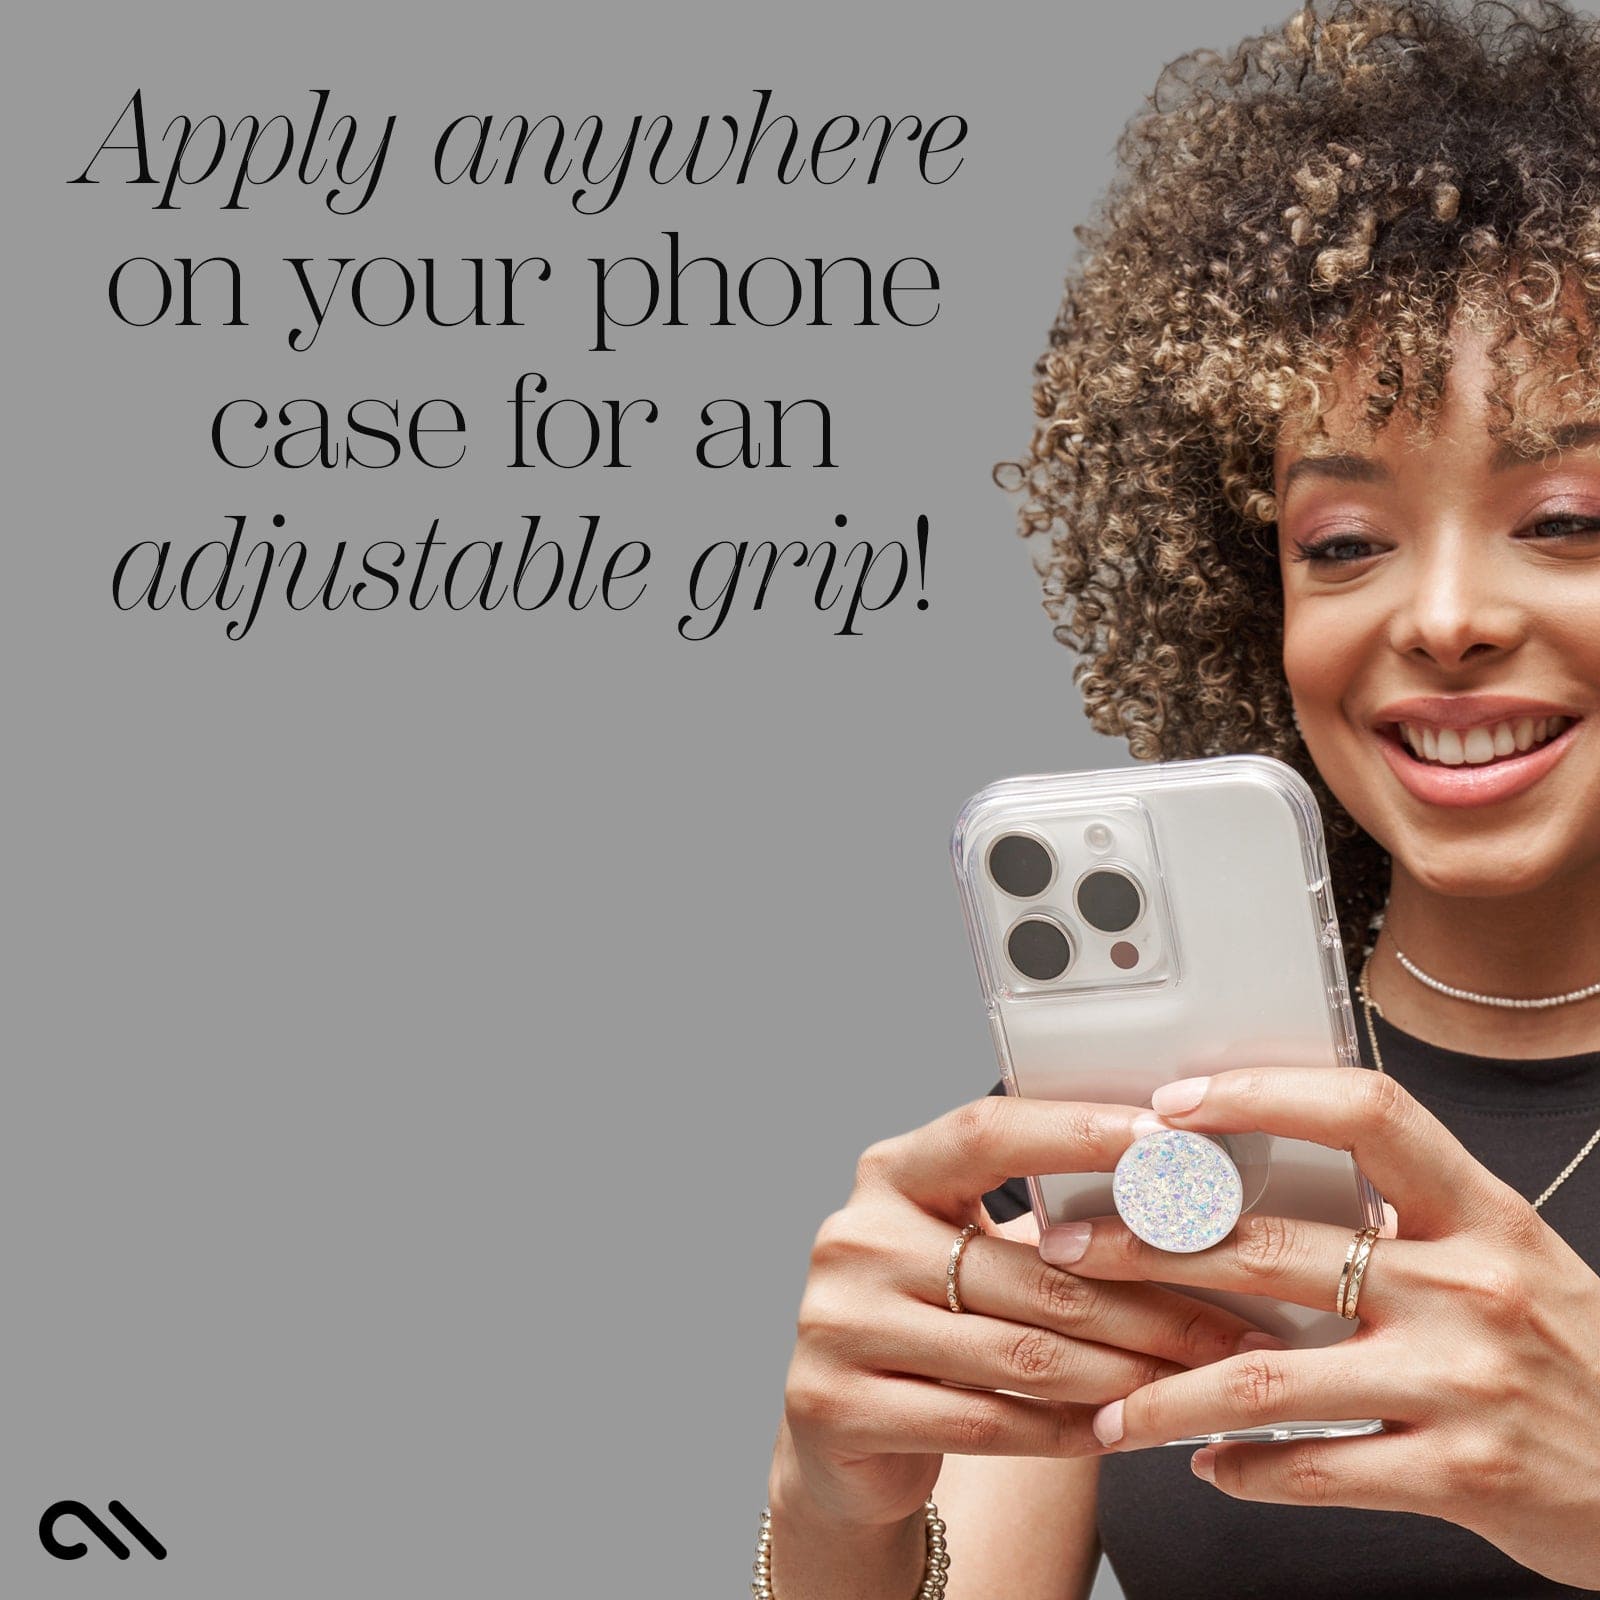 APPLY ANYWHERE ON YOUR PHONE CASE FOR AN ADJUSTABLE GRIP